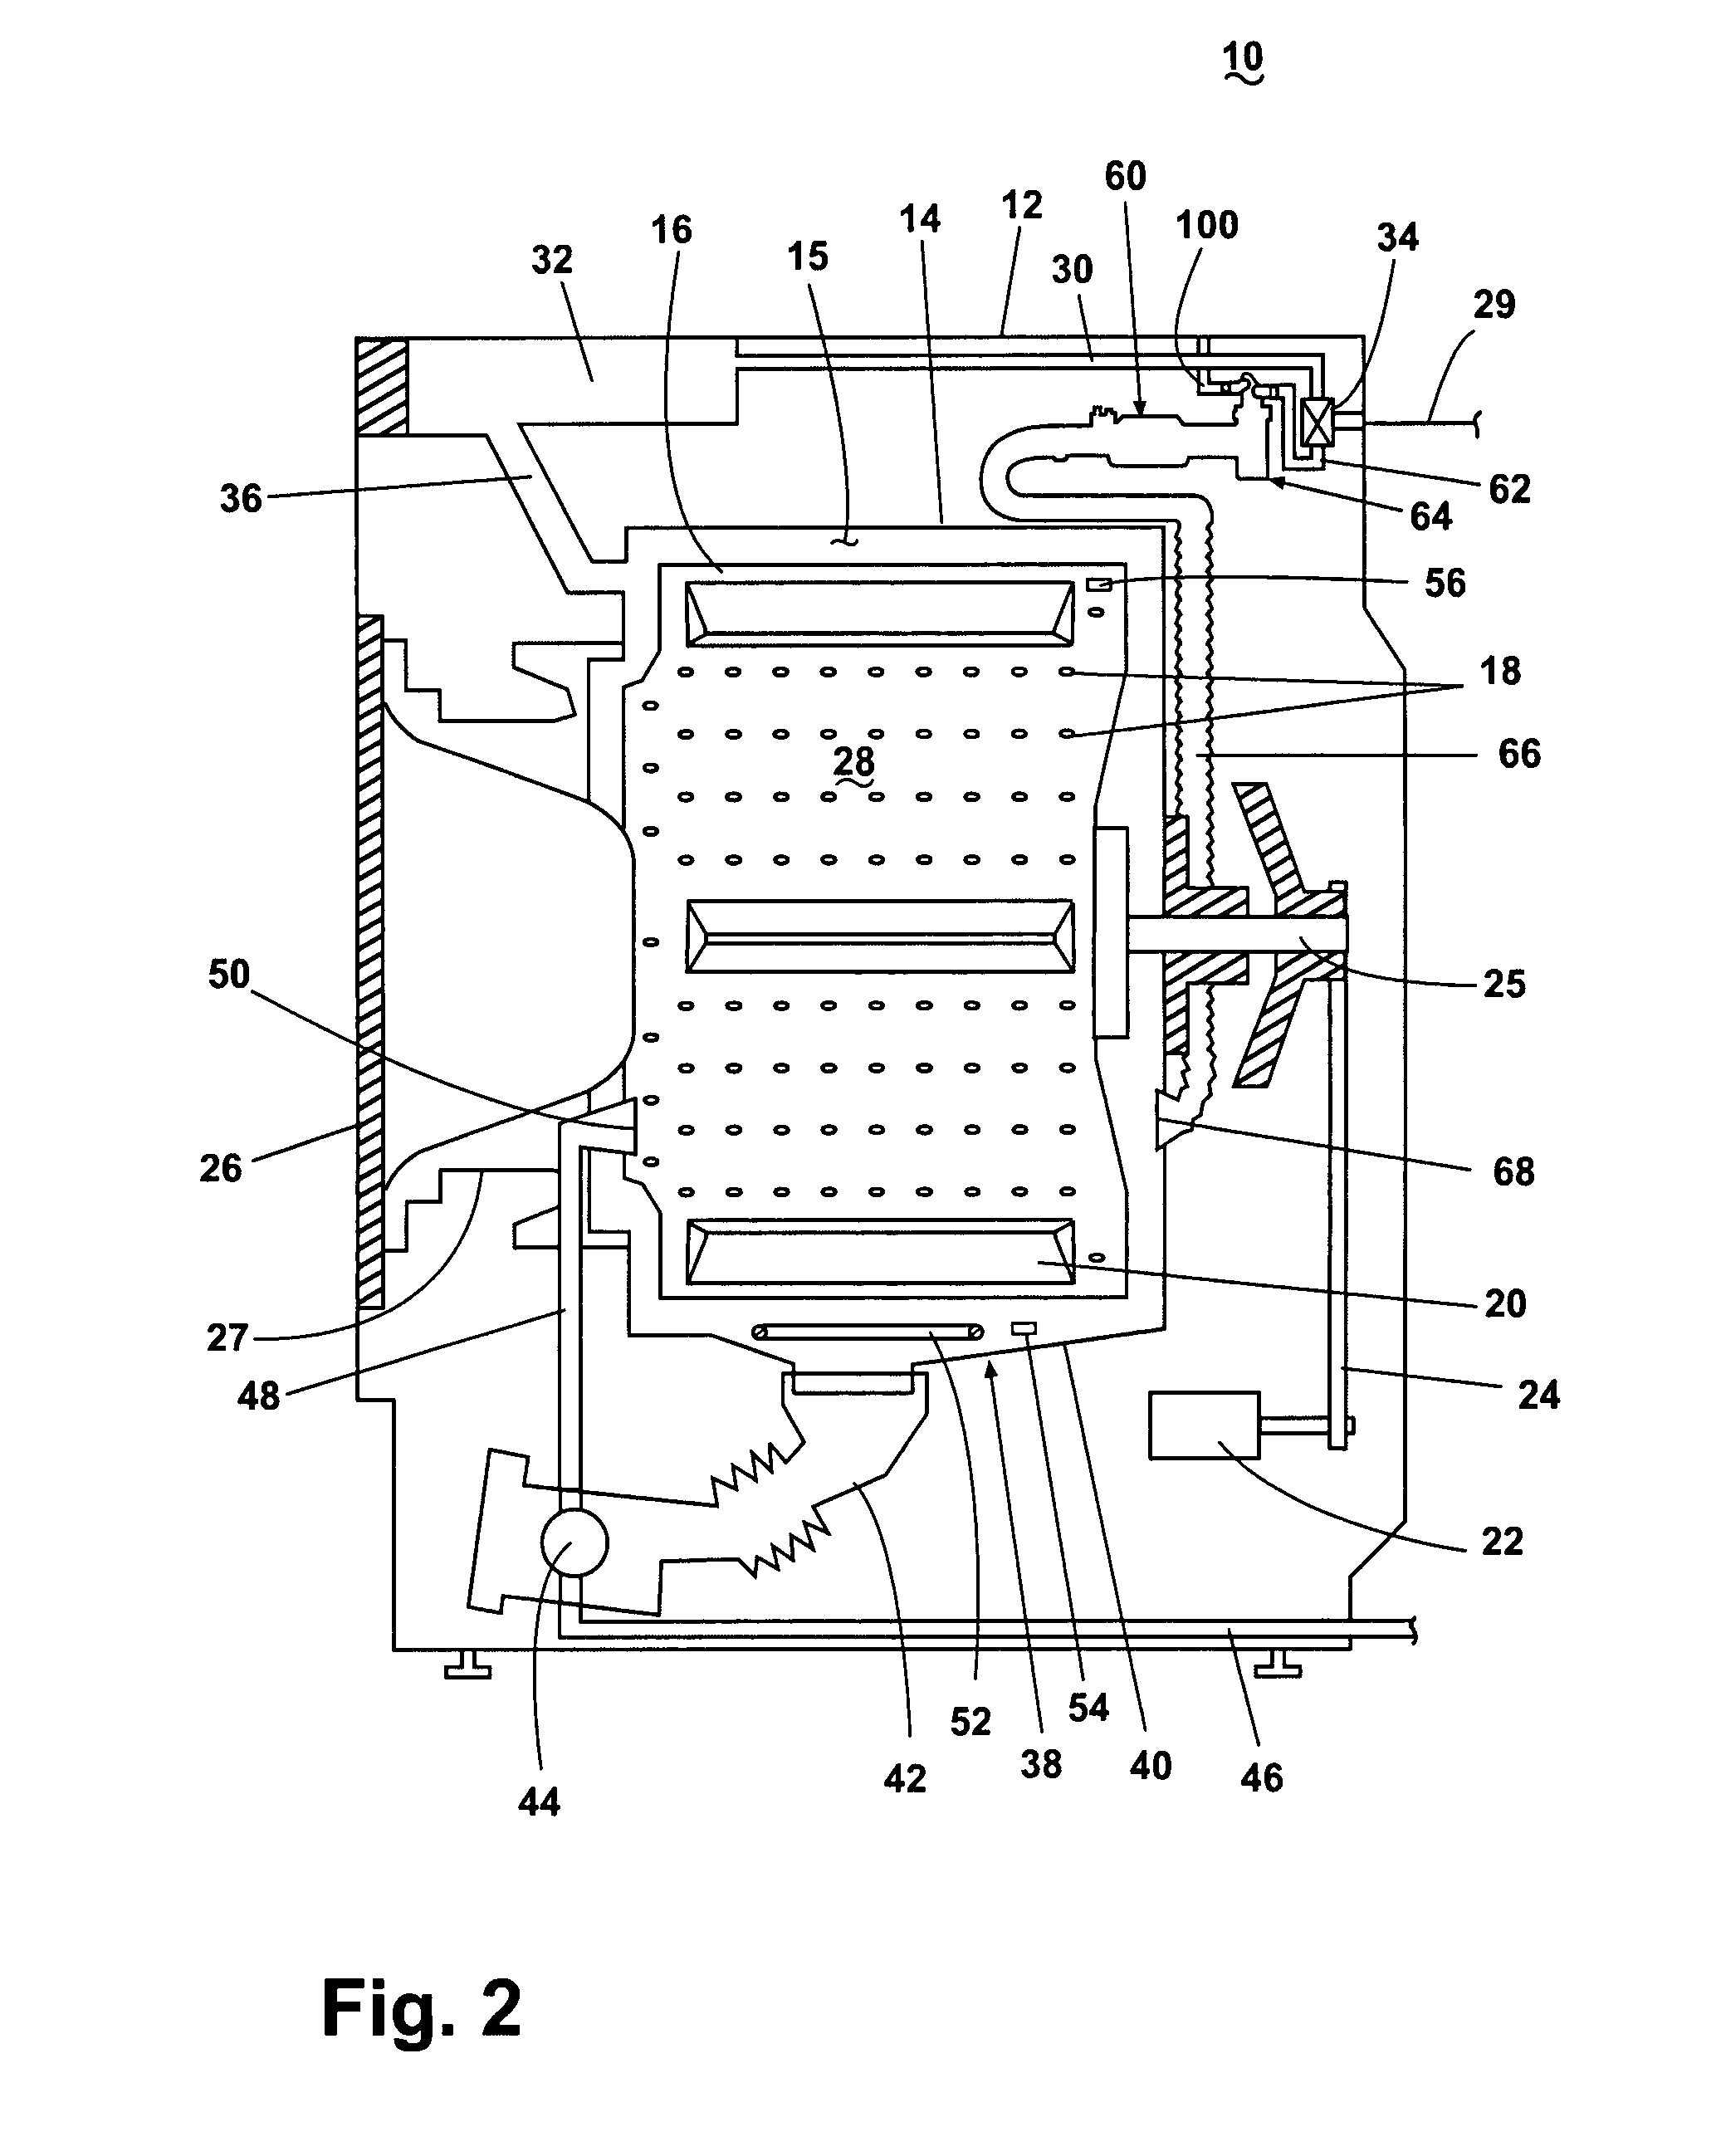 Method for Operating a Steam Generator in a Fabric Treatment Appliance